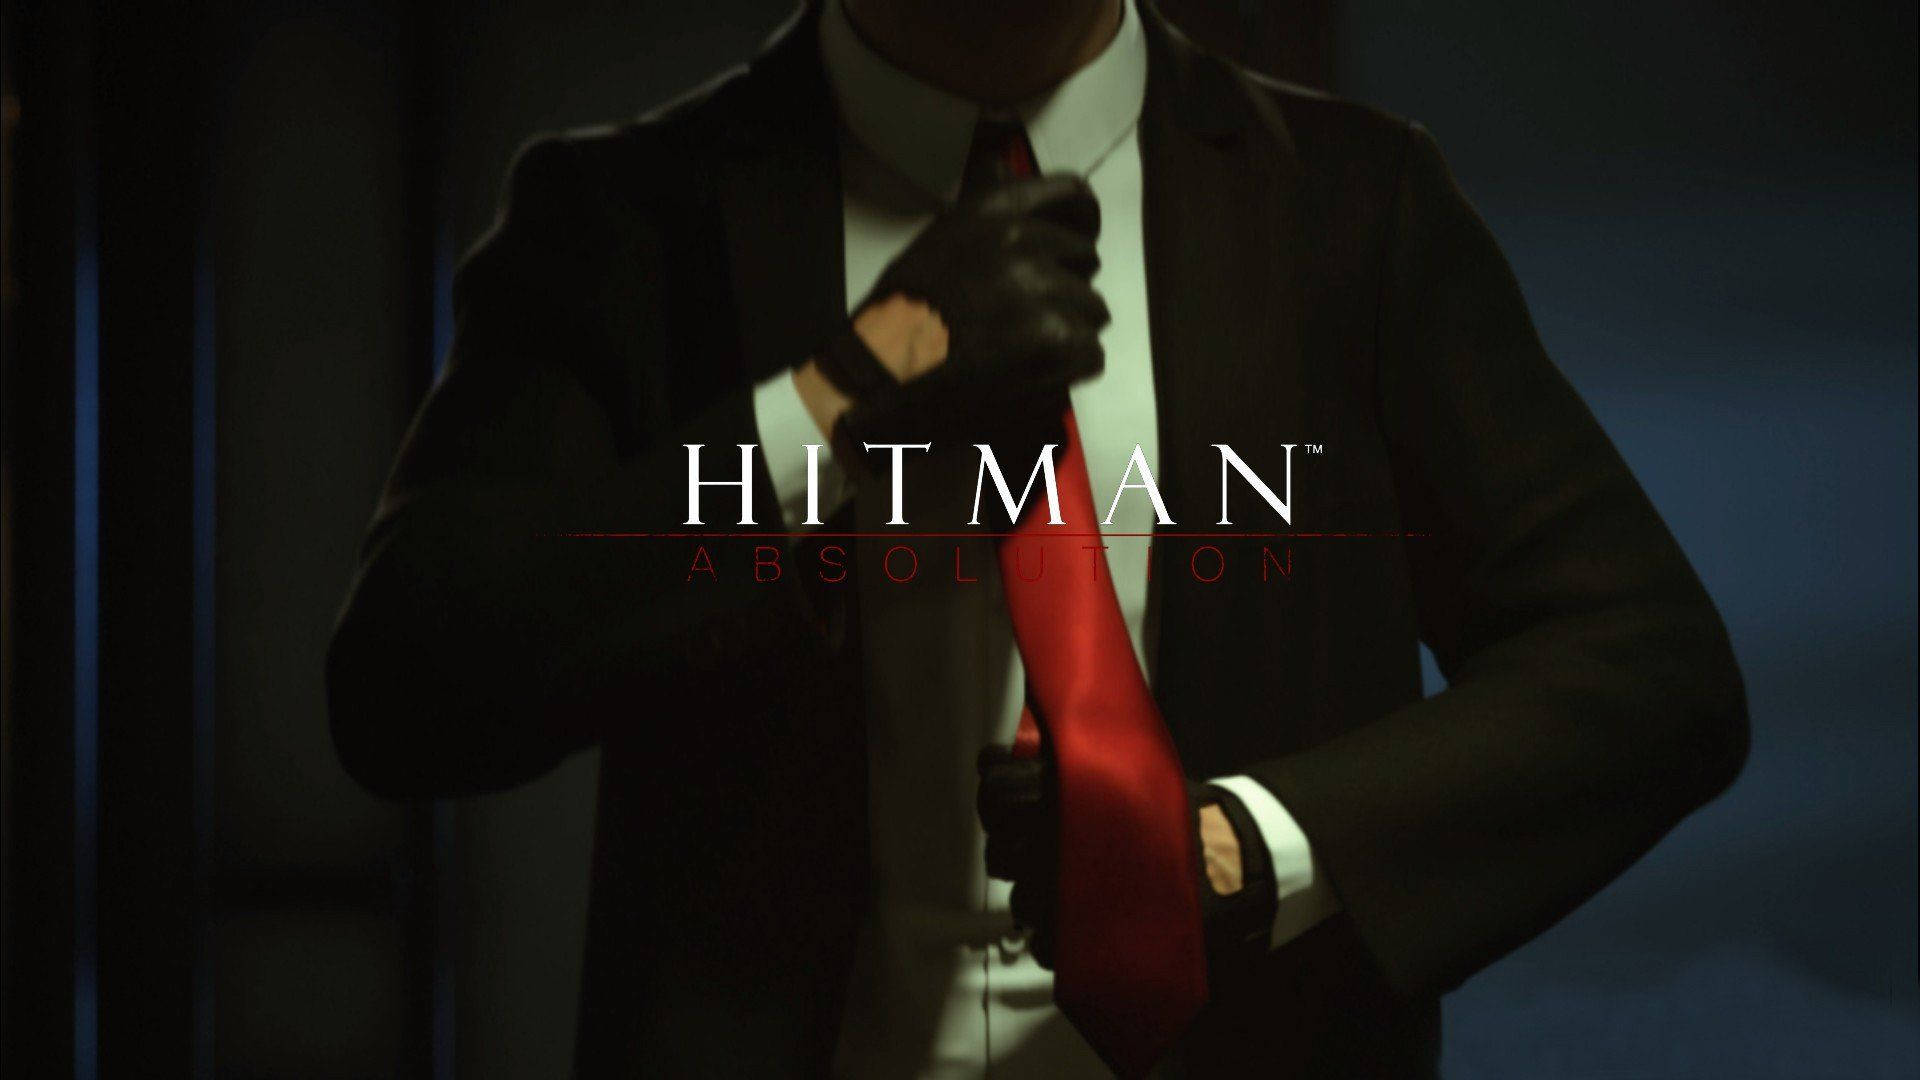 Hitman Absolution Game Title Poster Background